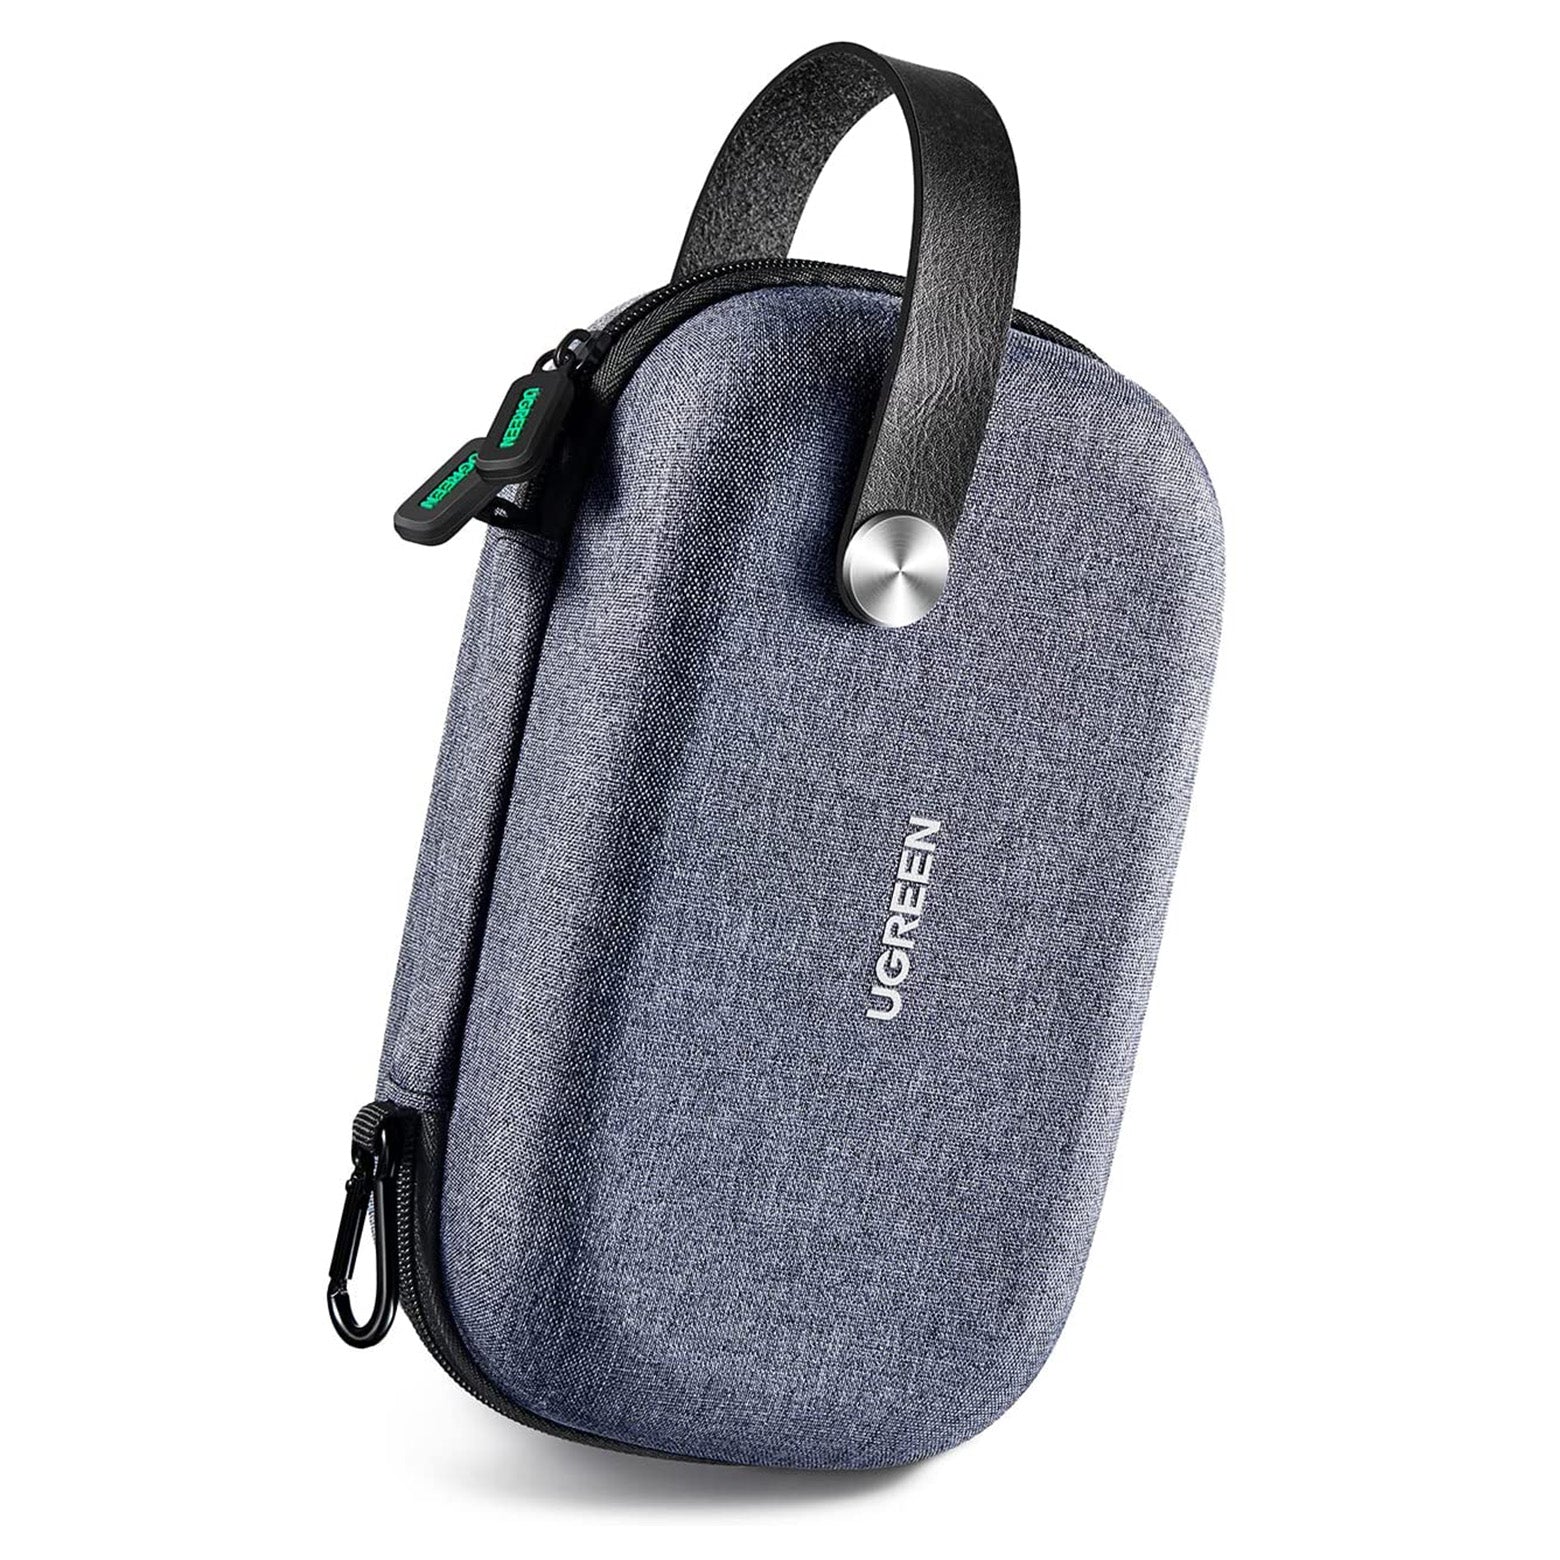 Home Office Waterproof Electronics Organizer Storage Bag – All